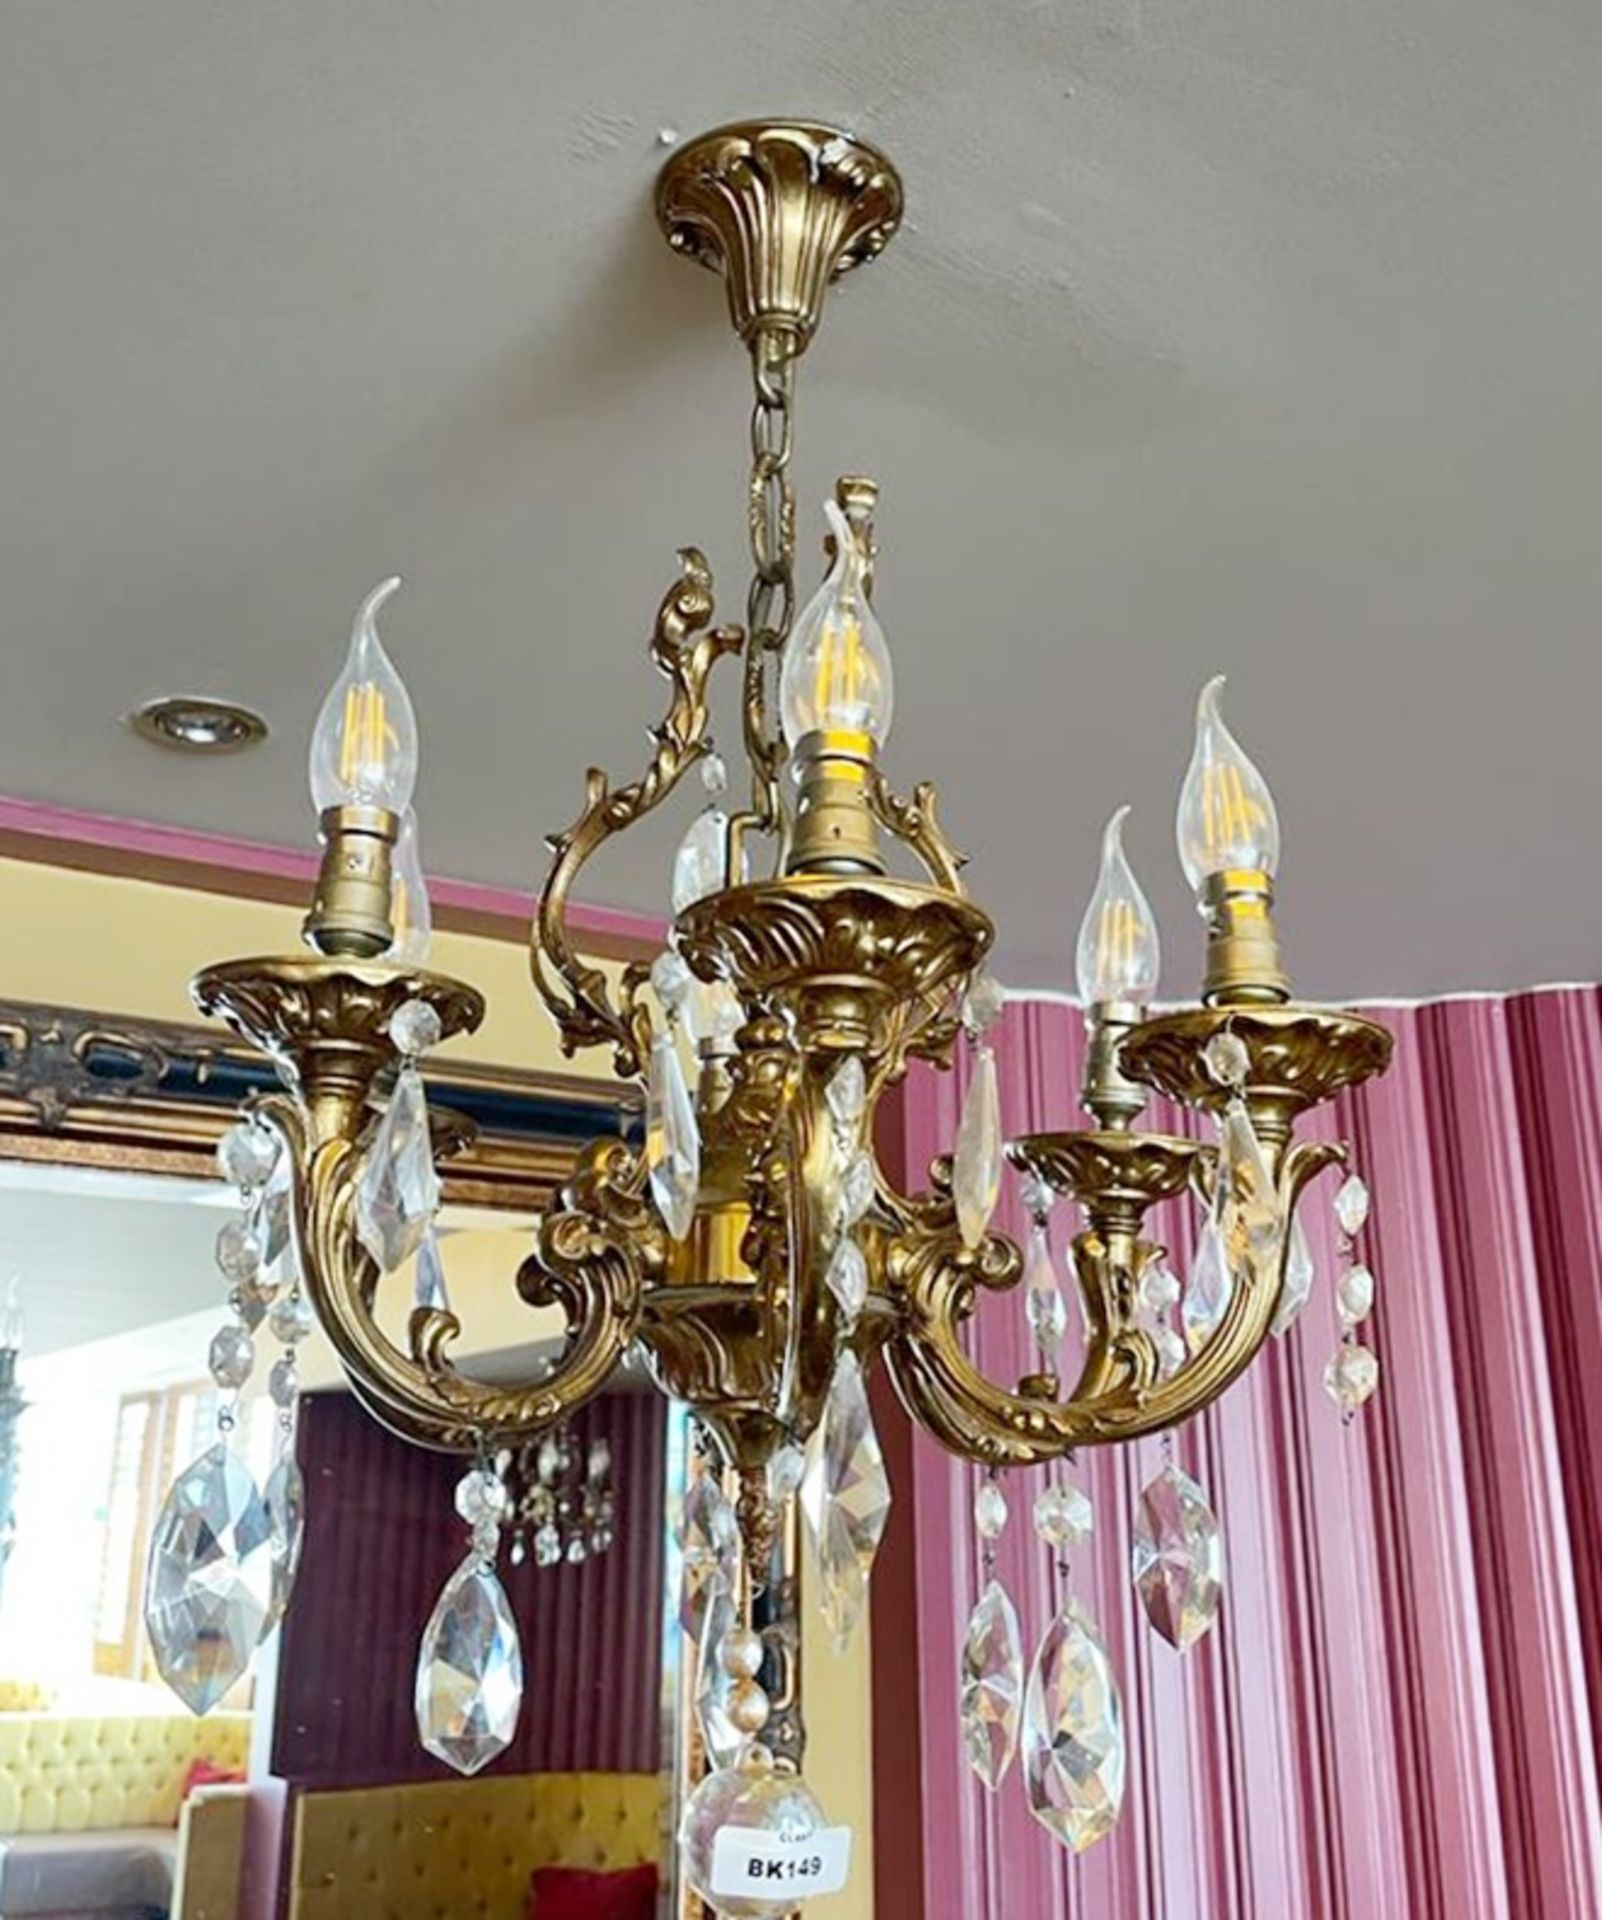 1 x Chandelier With Six Candle Lights - Ref: BK149 - CL686 - Location: Altrincham WA14This lot was - Image 3 of 4